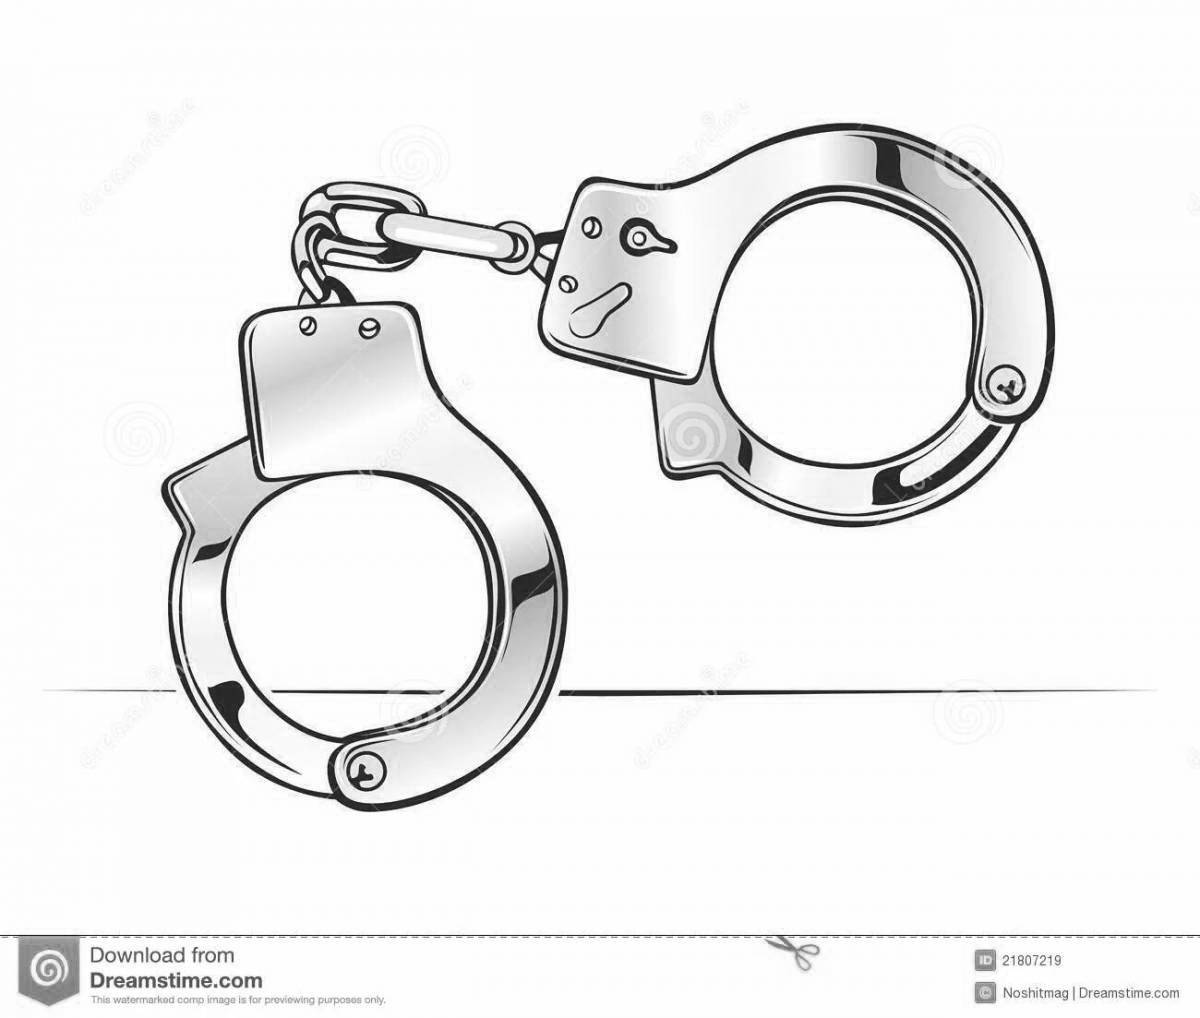 Coloring page amazing handcuffs